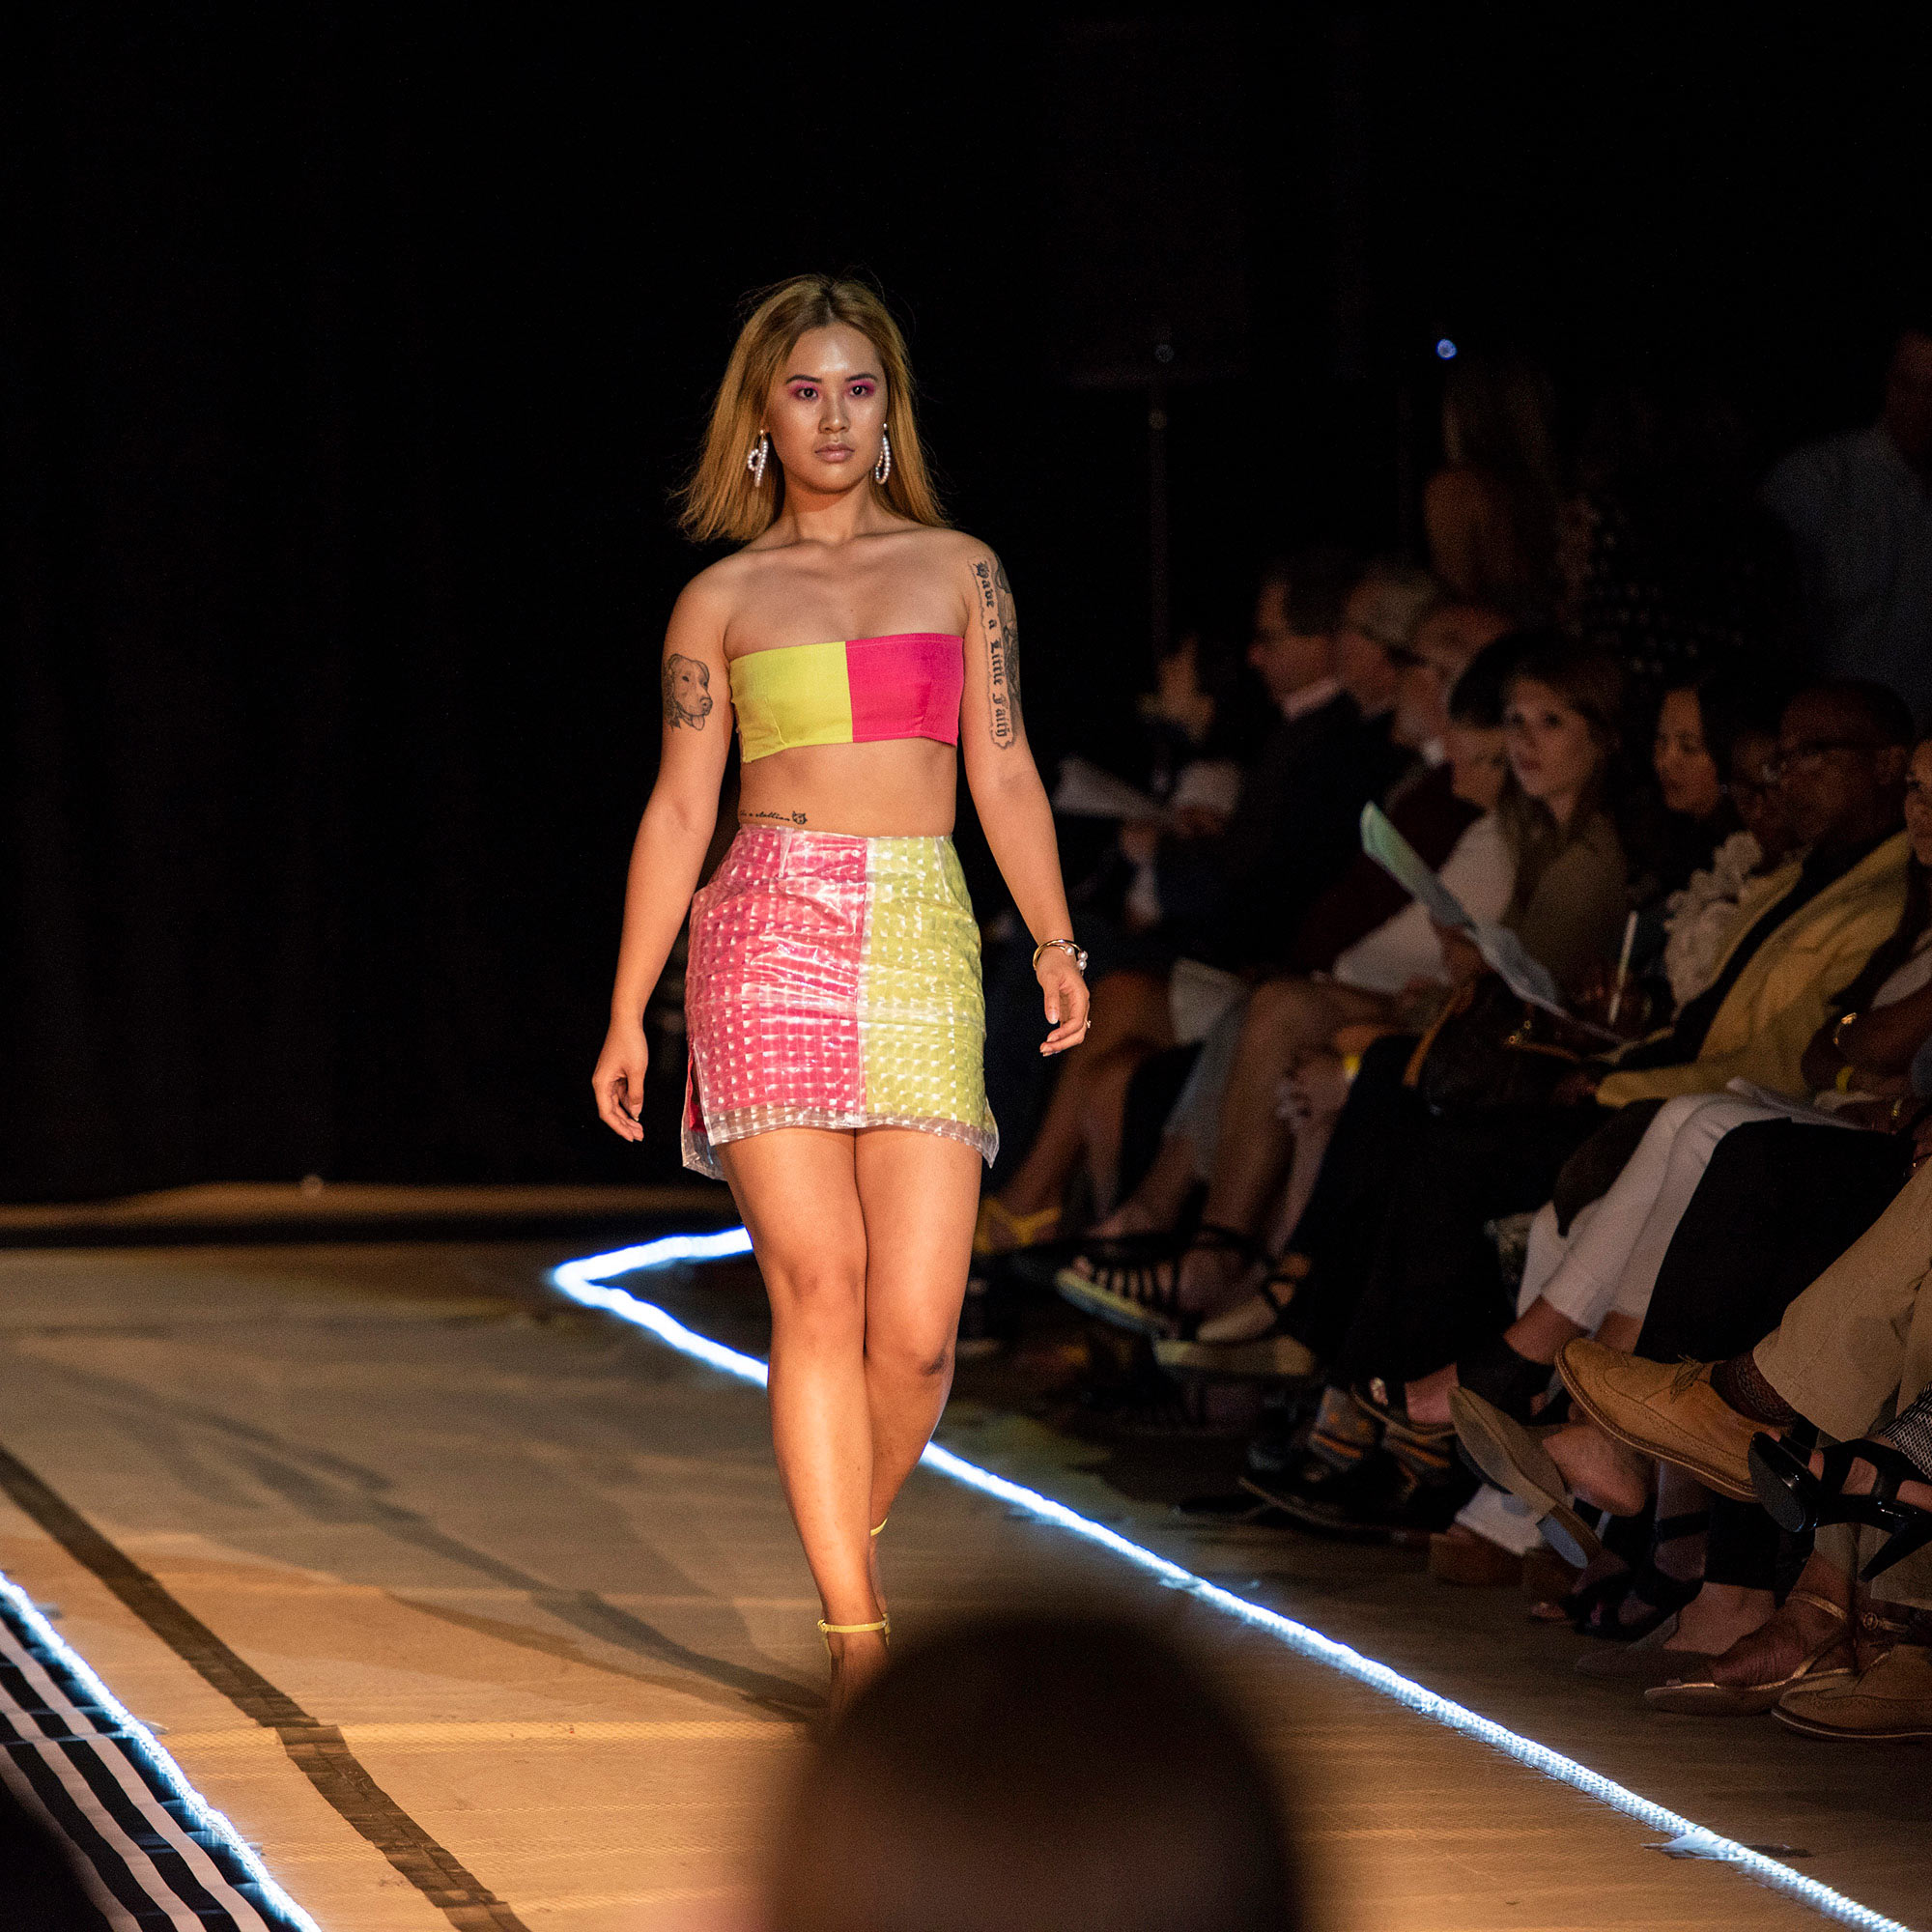 Model walking the runway in a brigth yellow and fushcia halter top and skirt during The Fashion Event: Mod.